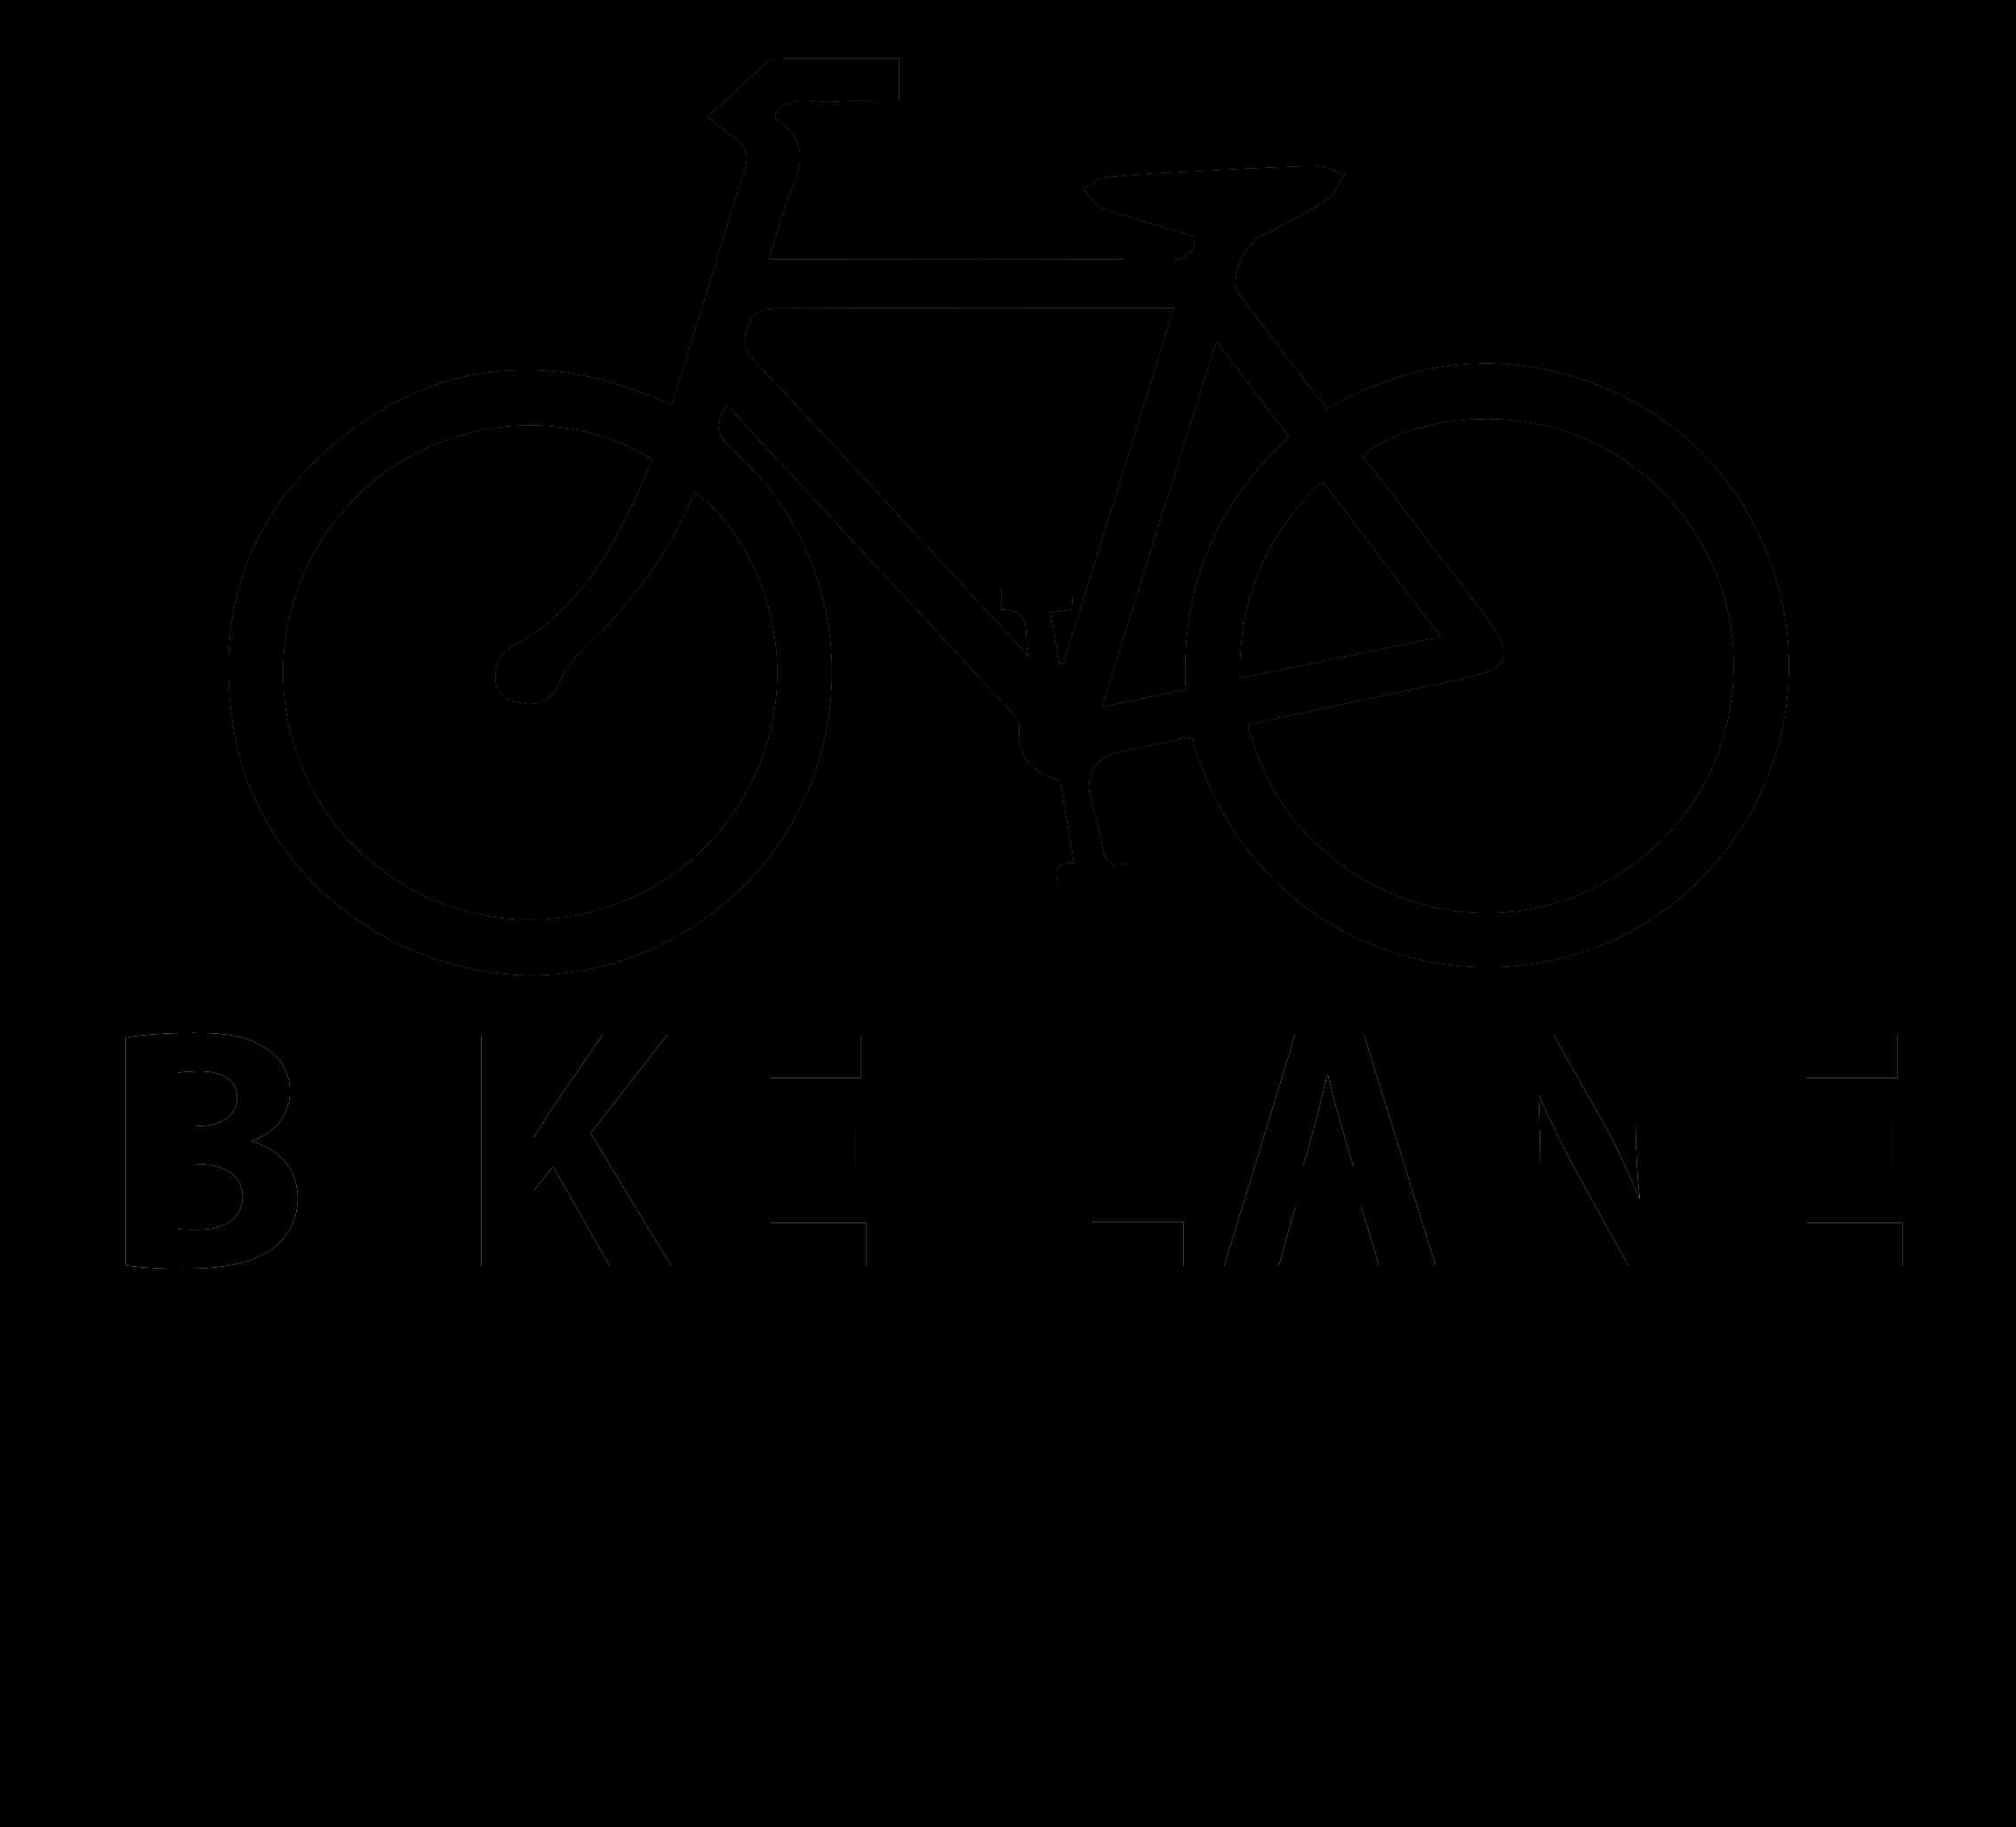 Bike Route Sign, Hd Png Download